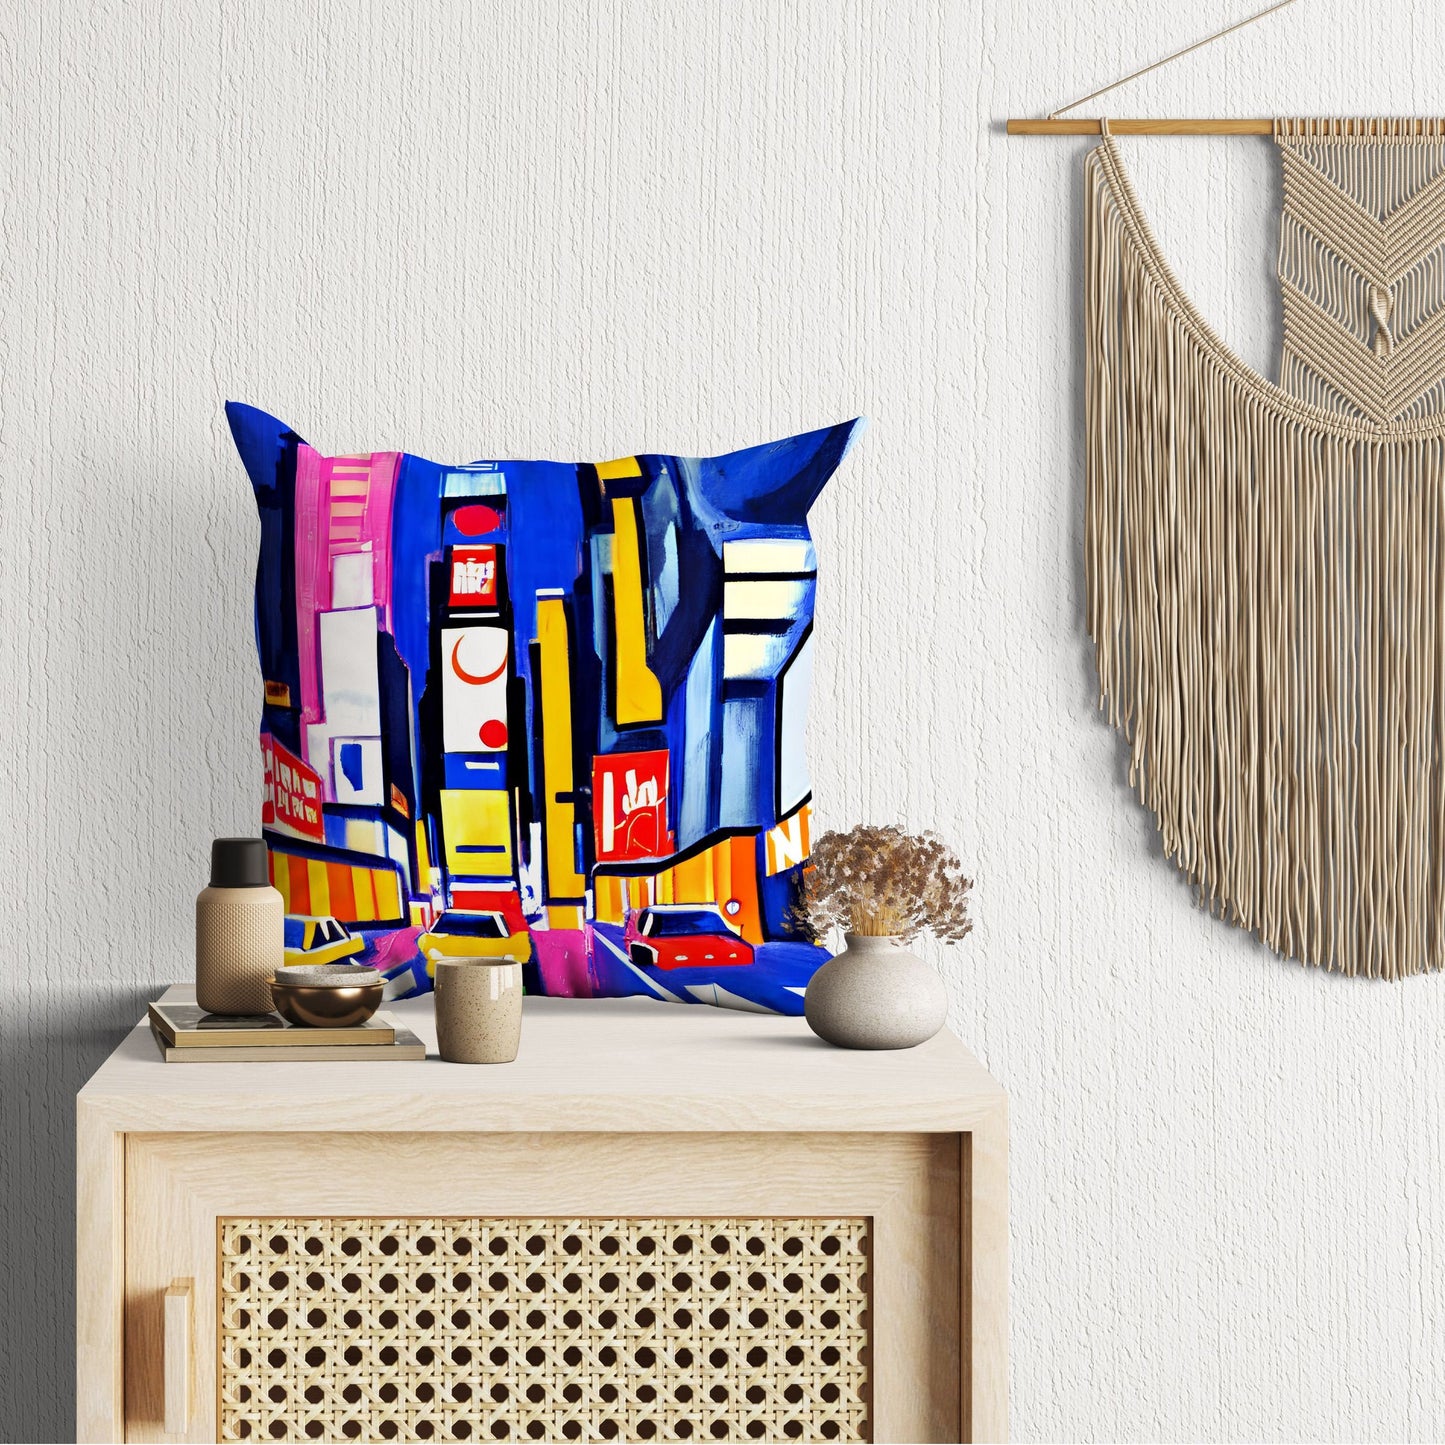 New York Times Square At Night, Throw Pillow Cover, Cat Pillow, Soft Pillow Cases, Colorful Pillow Case, Home And Living, Sofa Pillows